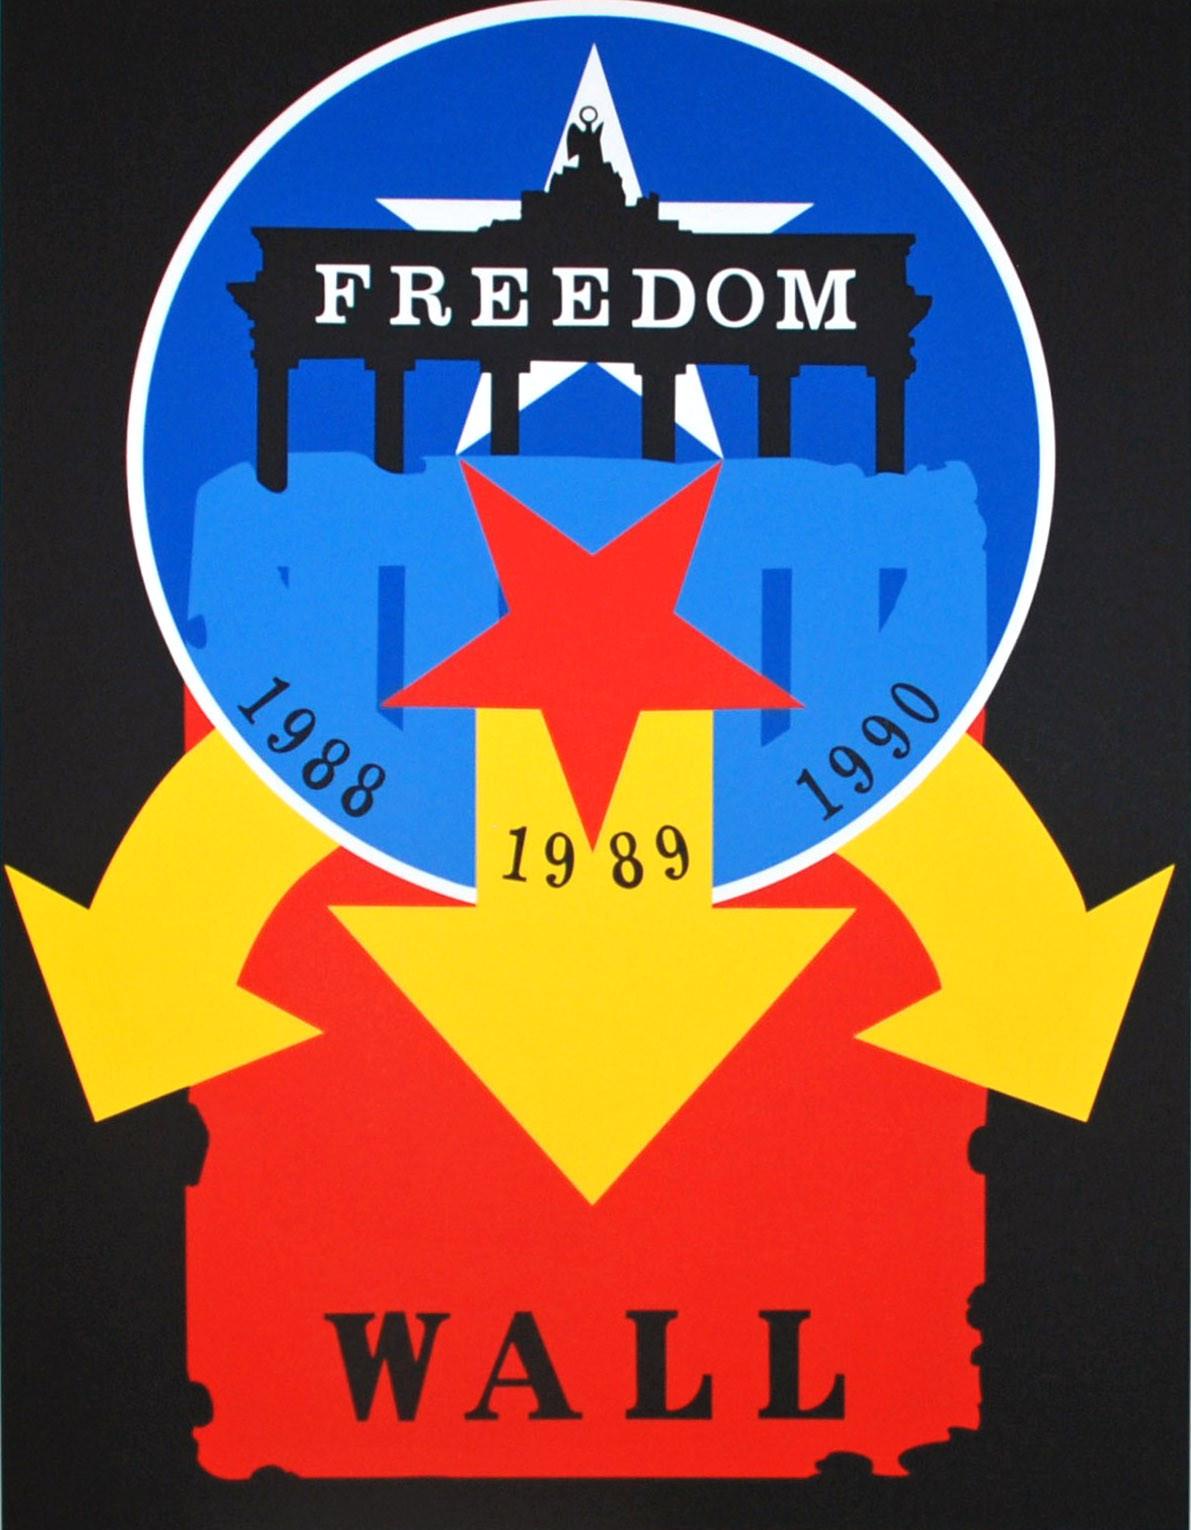 The Wall - Print by Robert Indiana